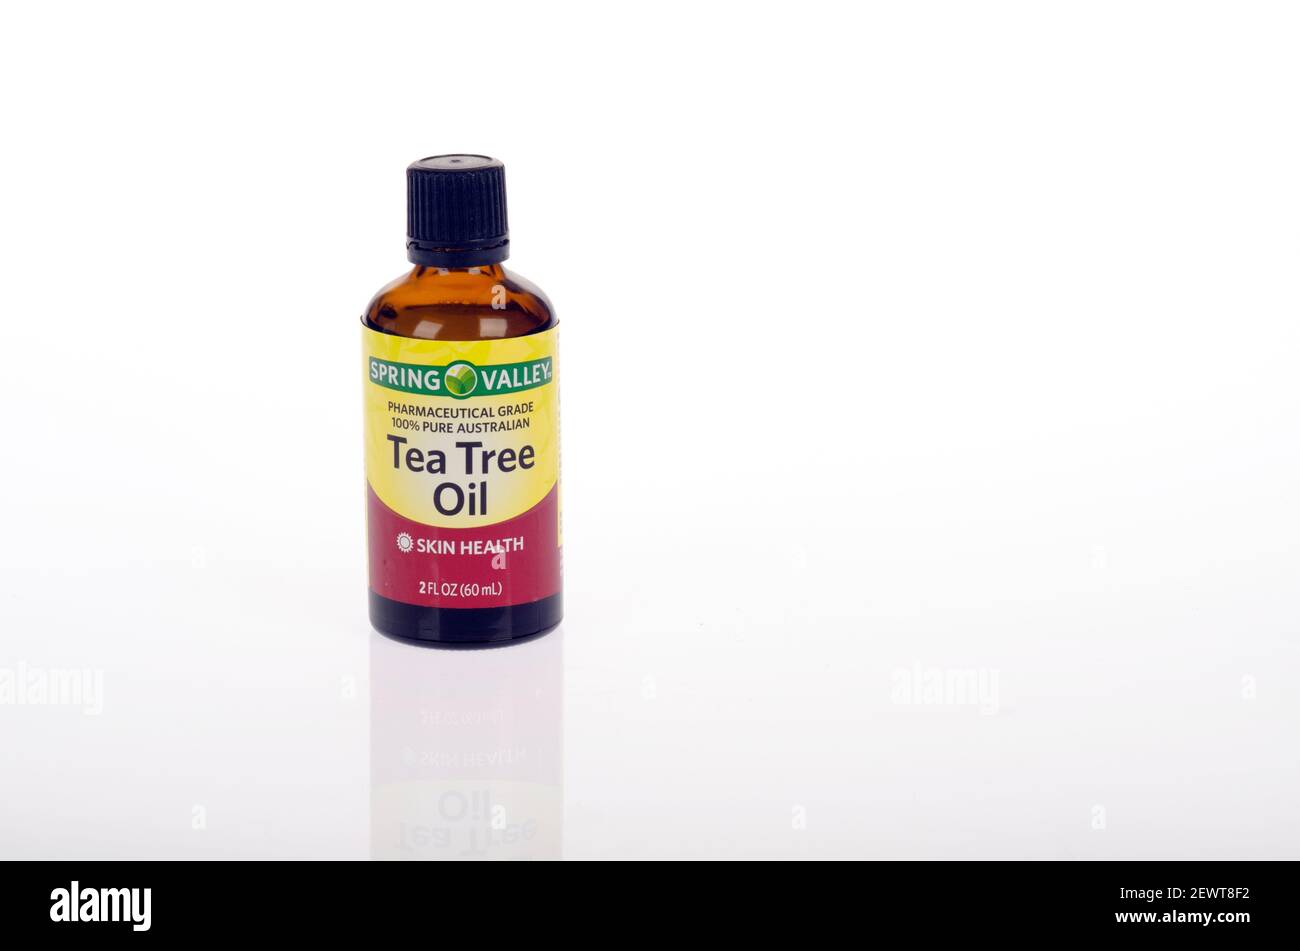 Tea Tree Oil Bottle by Spring Valley Stock Photo